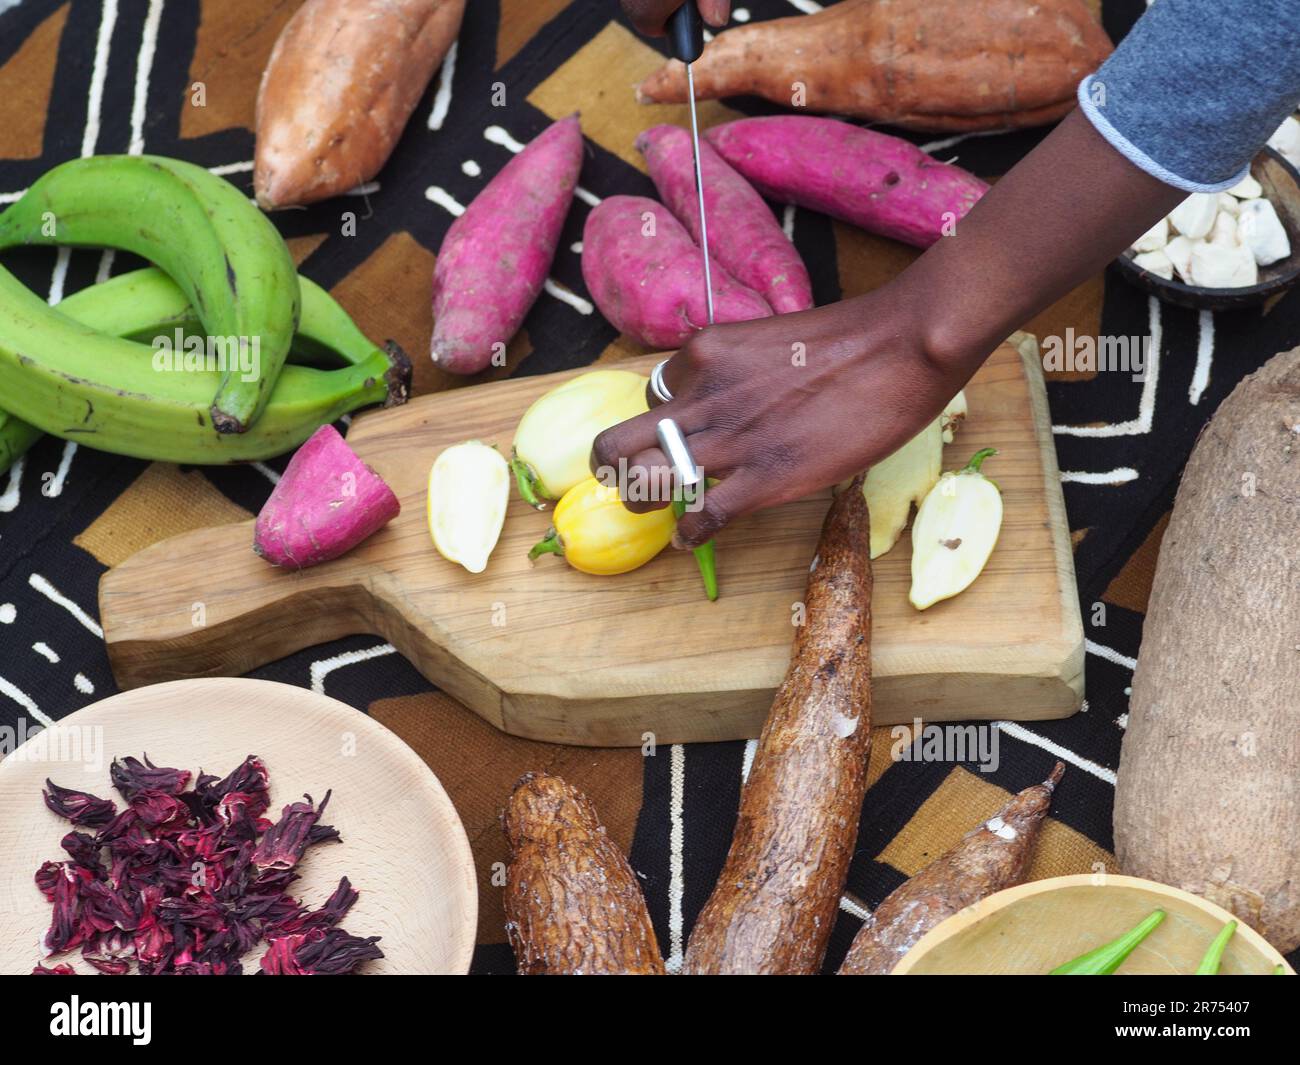 black woman cutting typical african veggies and fruits, overhead shot. Cooking Ivory coast local food. Stock Photo